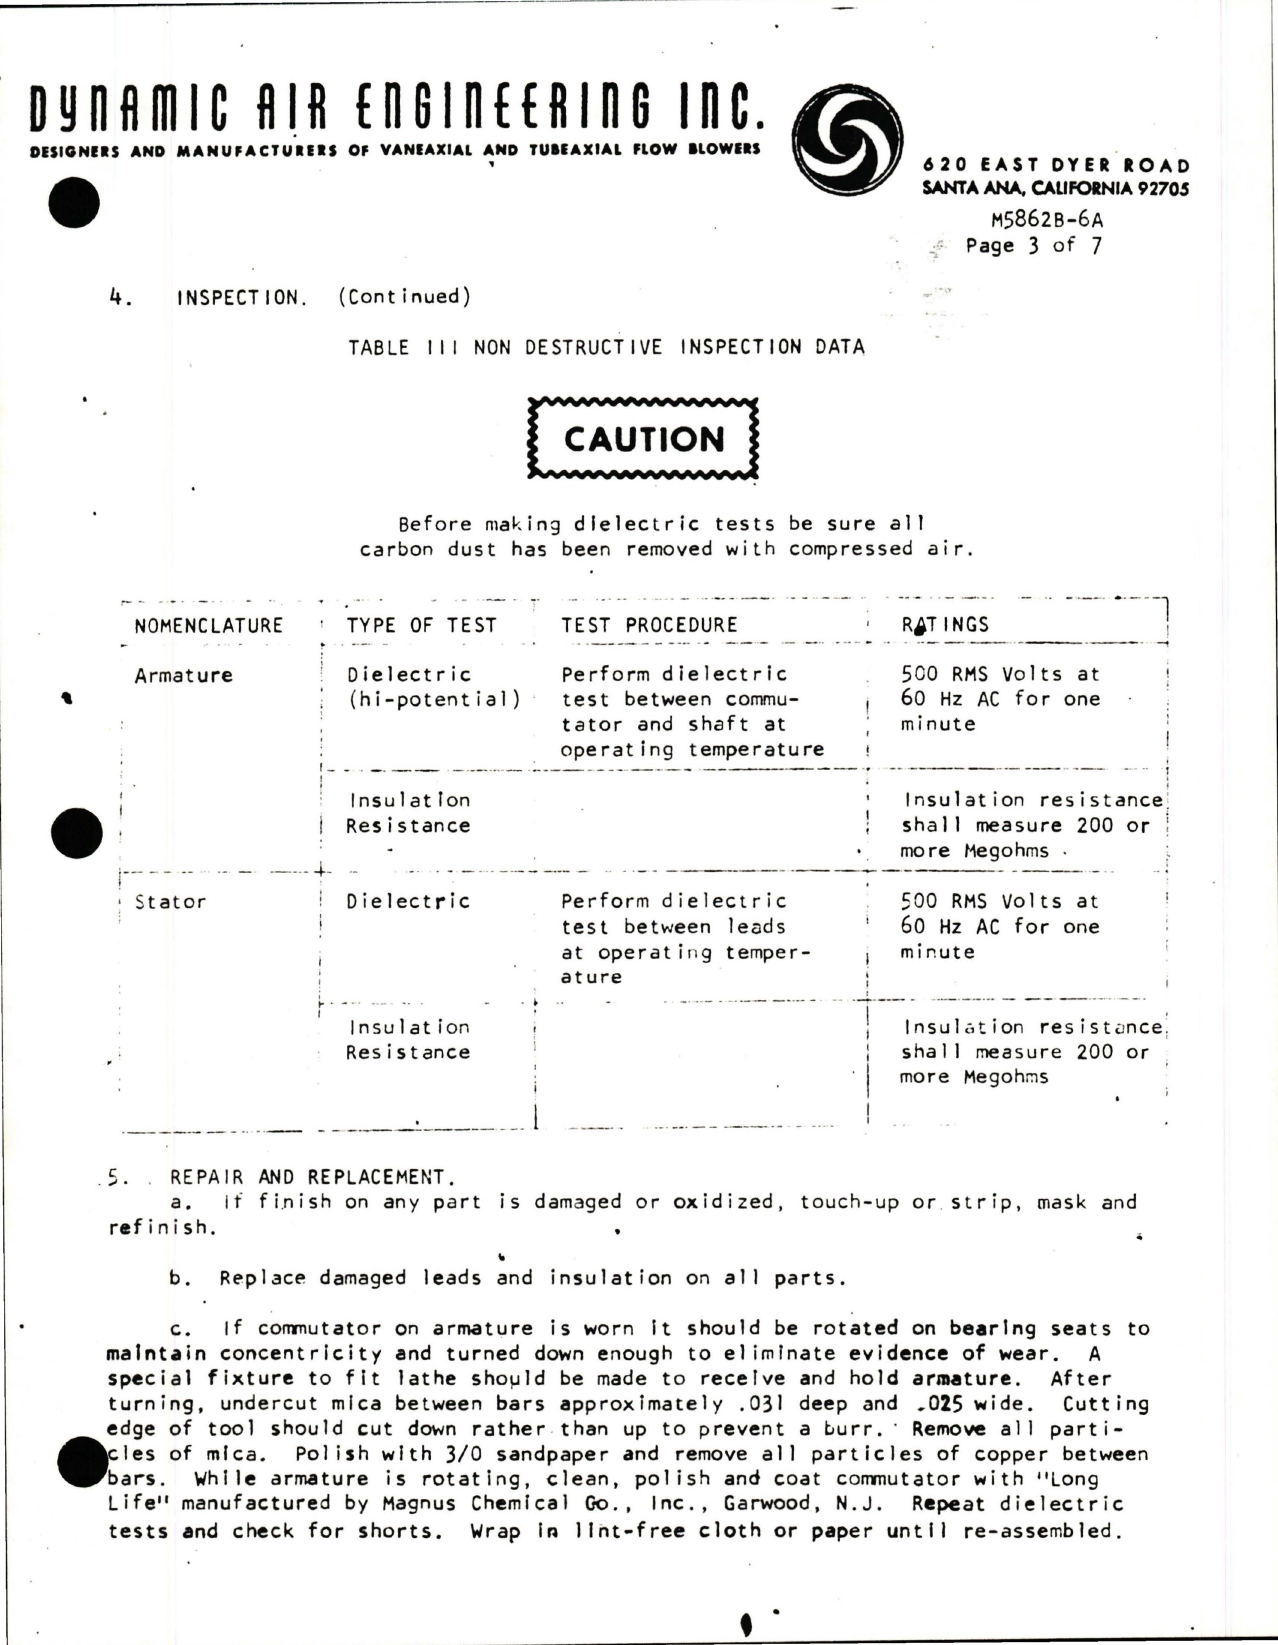 Sample page 5 from AirCorps Library document: Overhaul Instruction for Vaneaxial Fan - Part M5862B-6A with Motor M3416C 